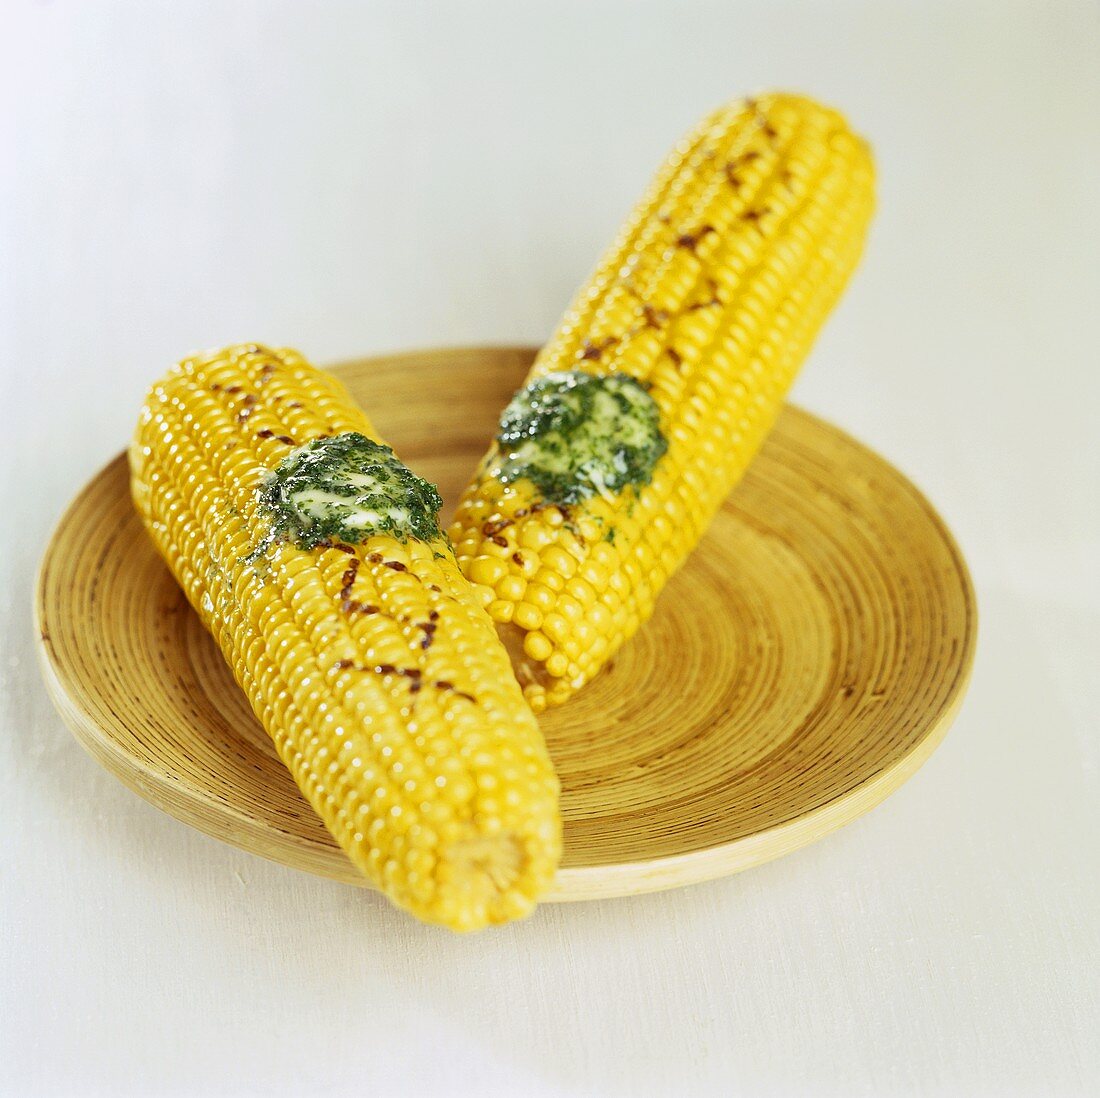 Barbecued corncobs with herb butter